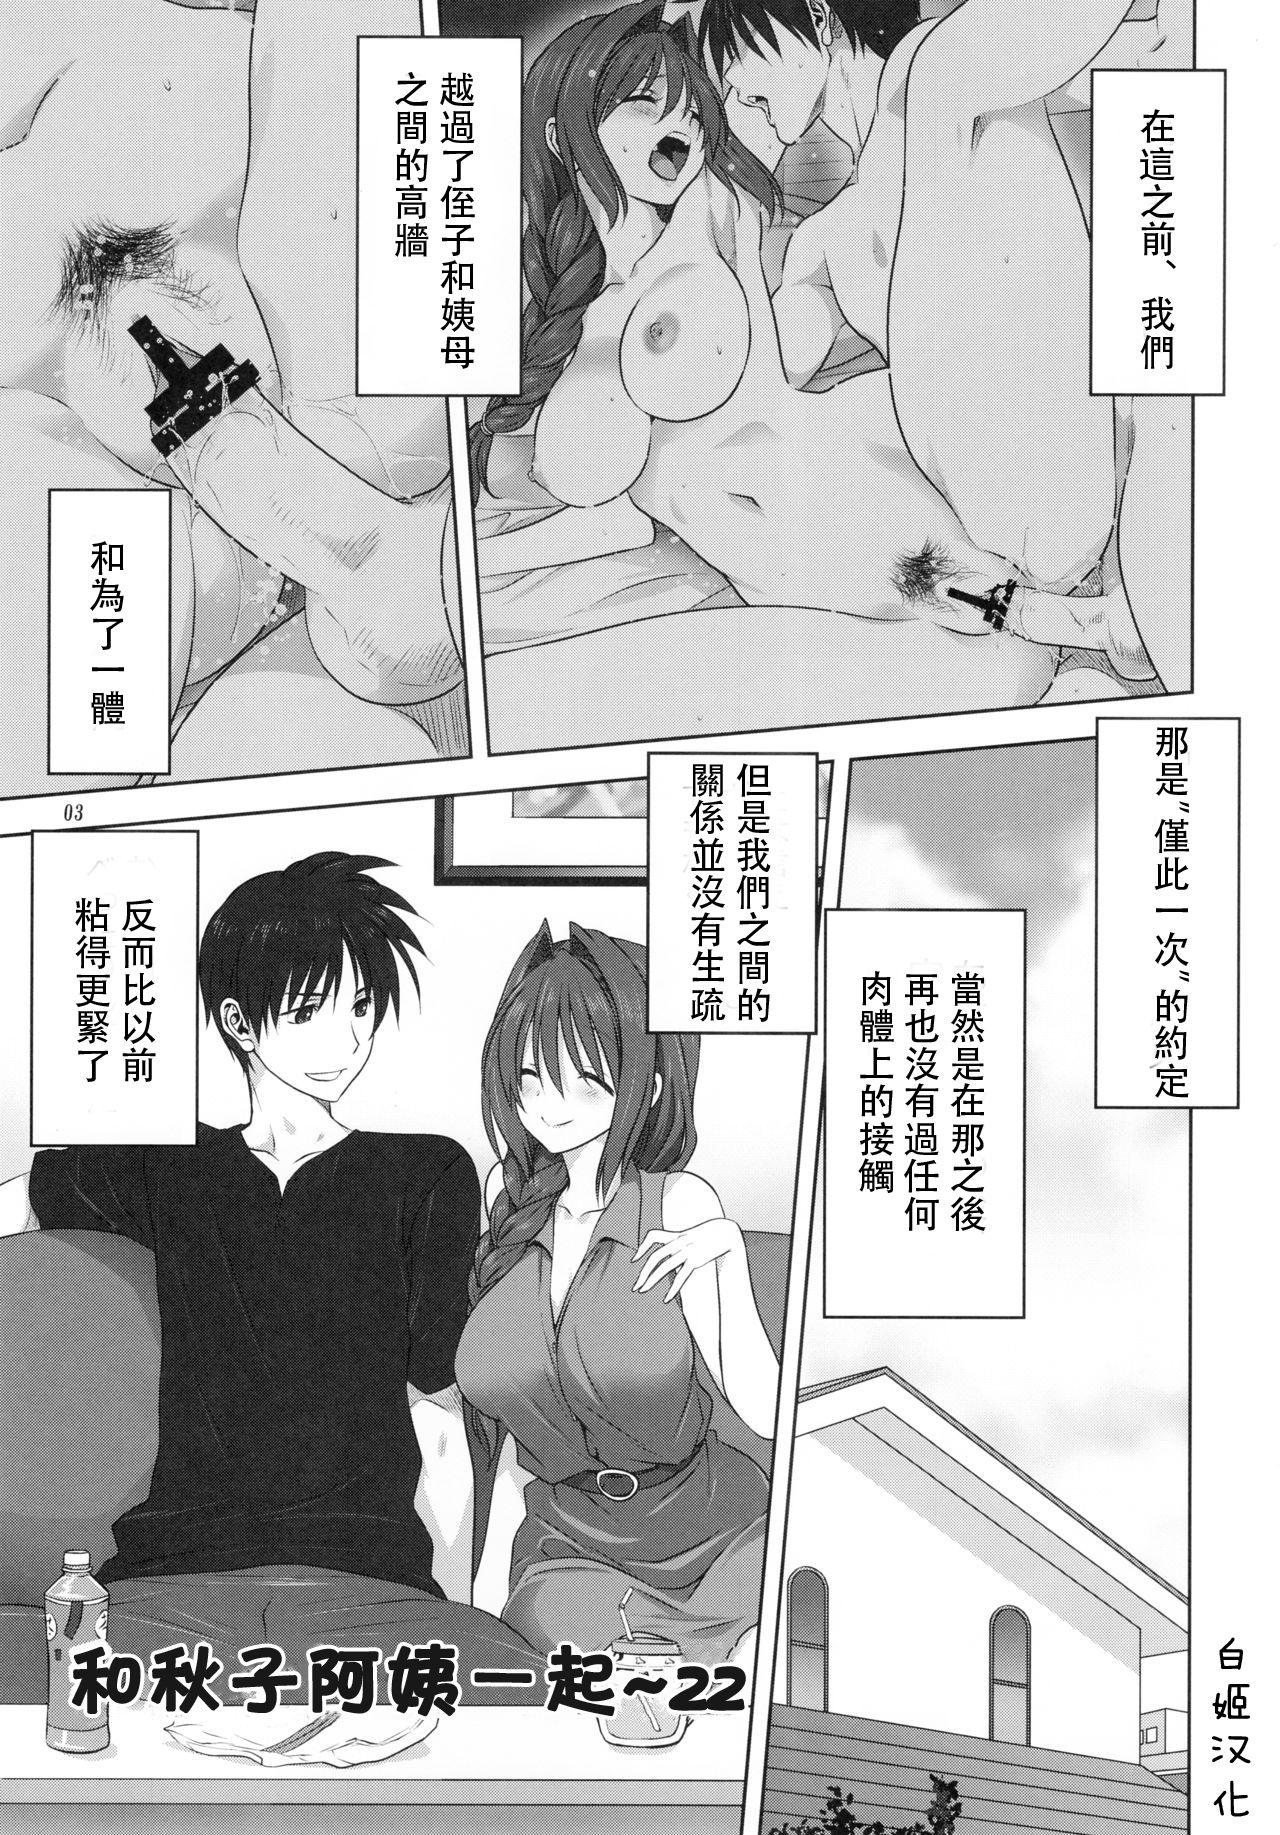 Amature Allure Akiko-san to Issho 22 - Kanon Thong - Page 2